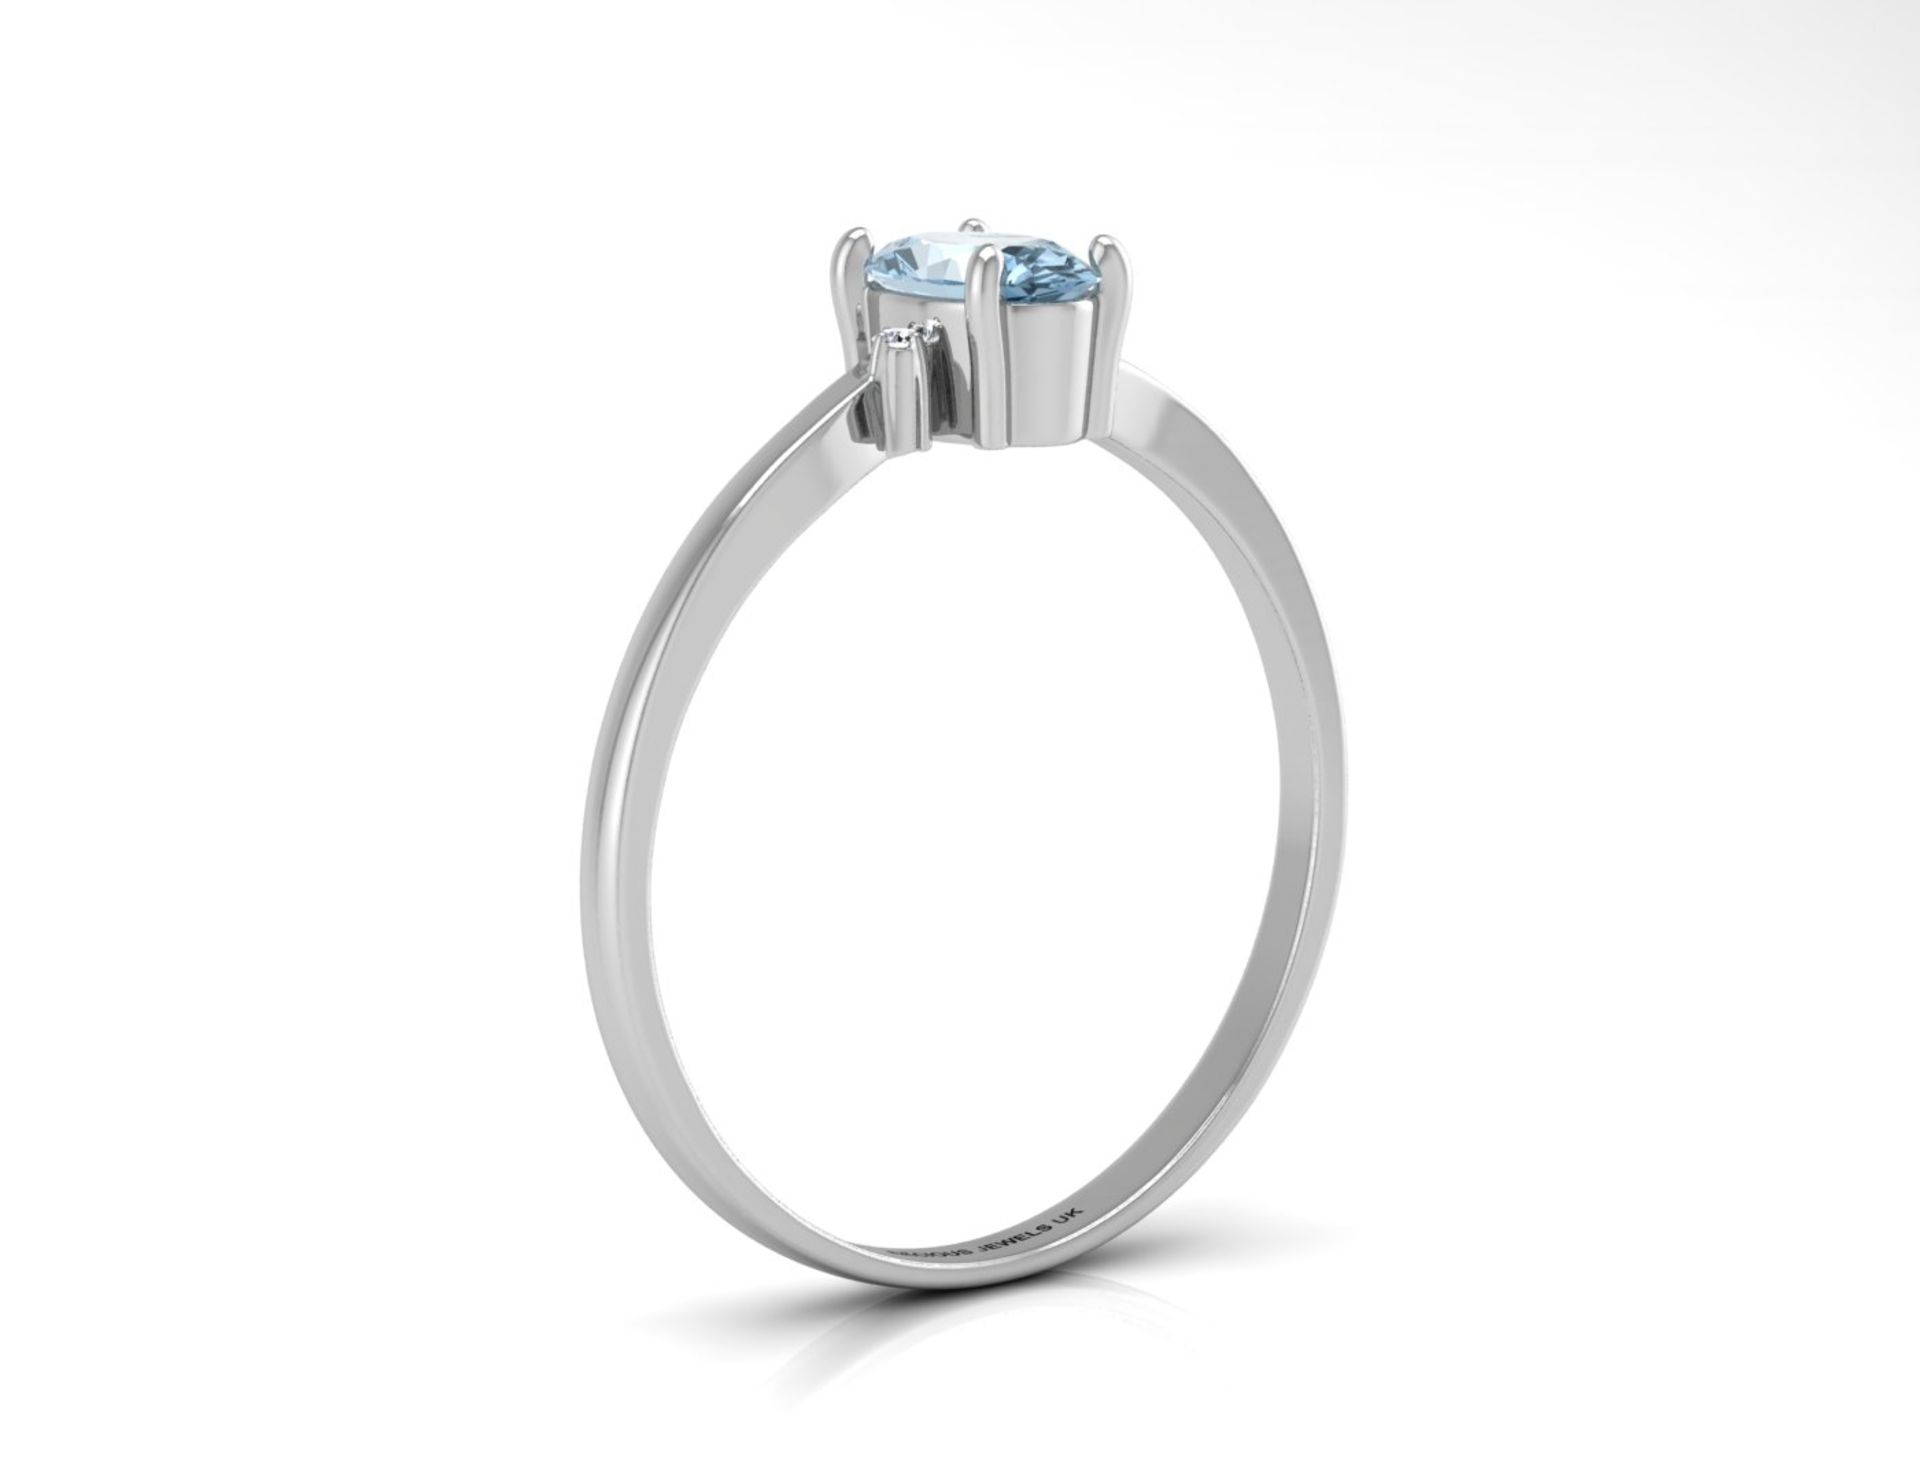 9ct White Gold Diamond and Oval Shape Blue Topaz Ring 0.01 Carats - Valued by AGI £650.00 - 9ct - Image 2 of 8